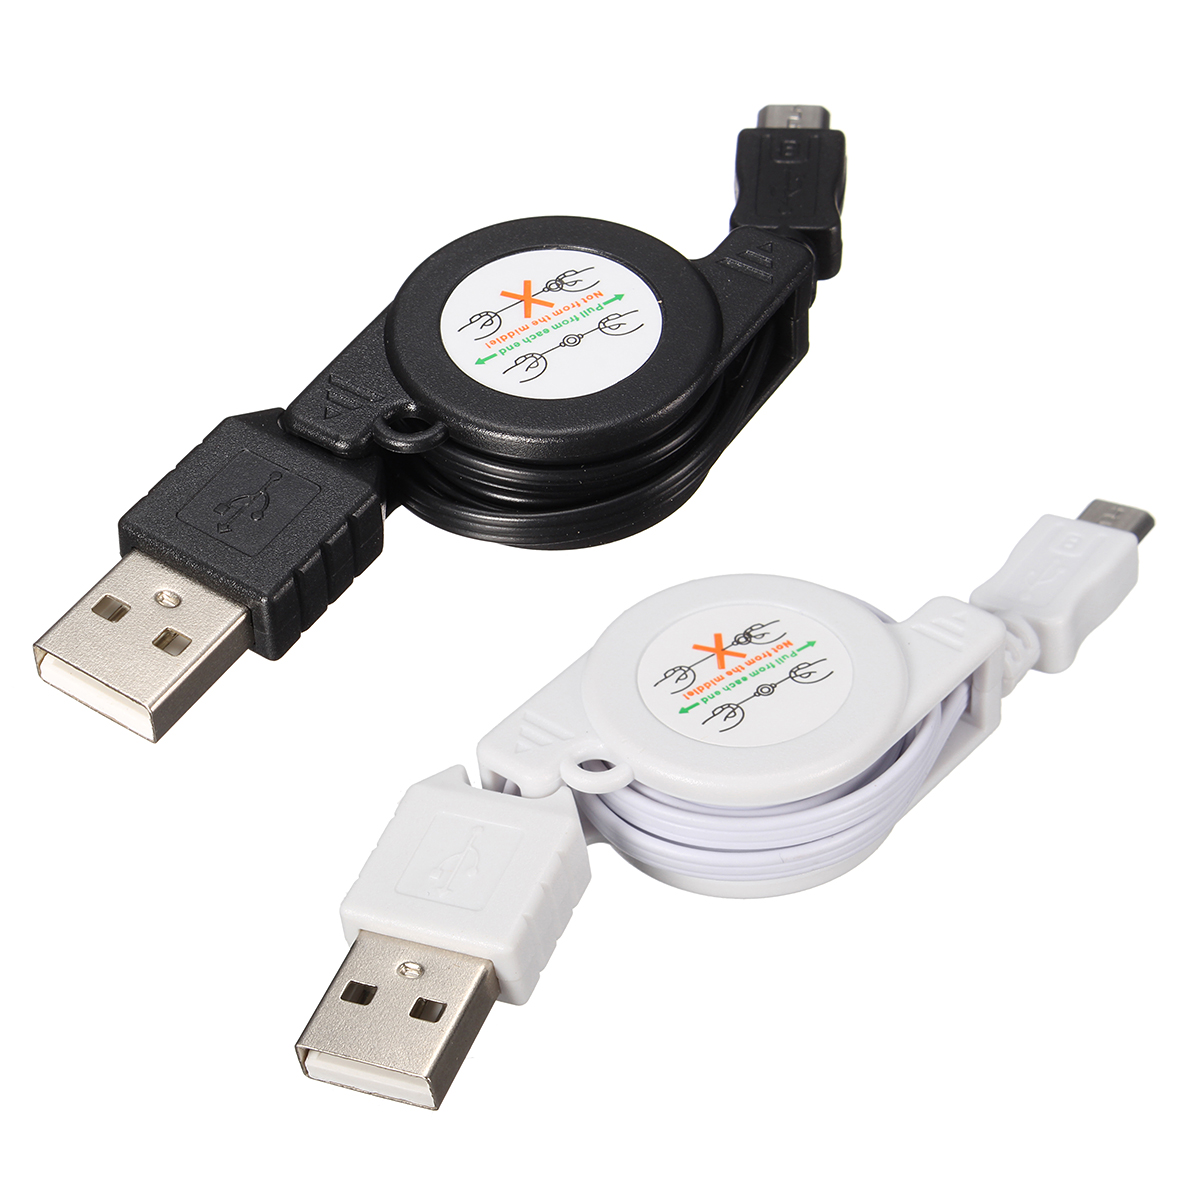 

Retractable Charging Micro USB torage Data Cable for Mobile Phone